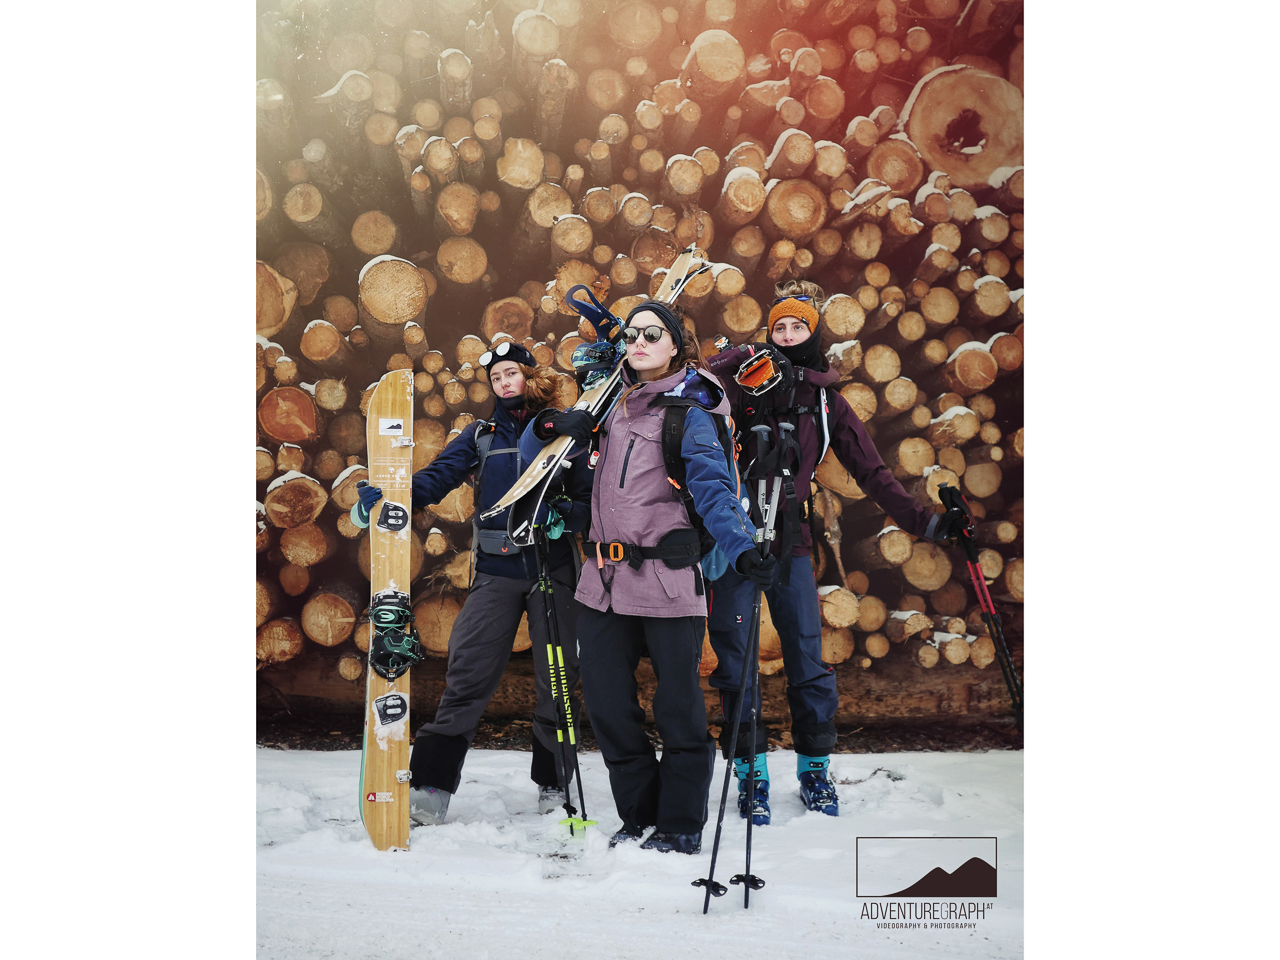 Ski touring girls with splitboards wear serious business faces.